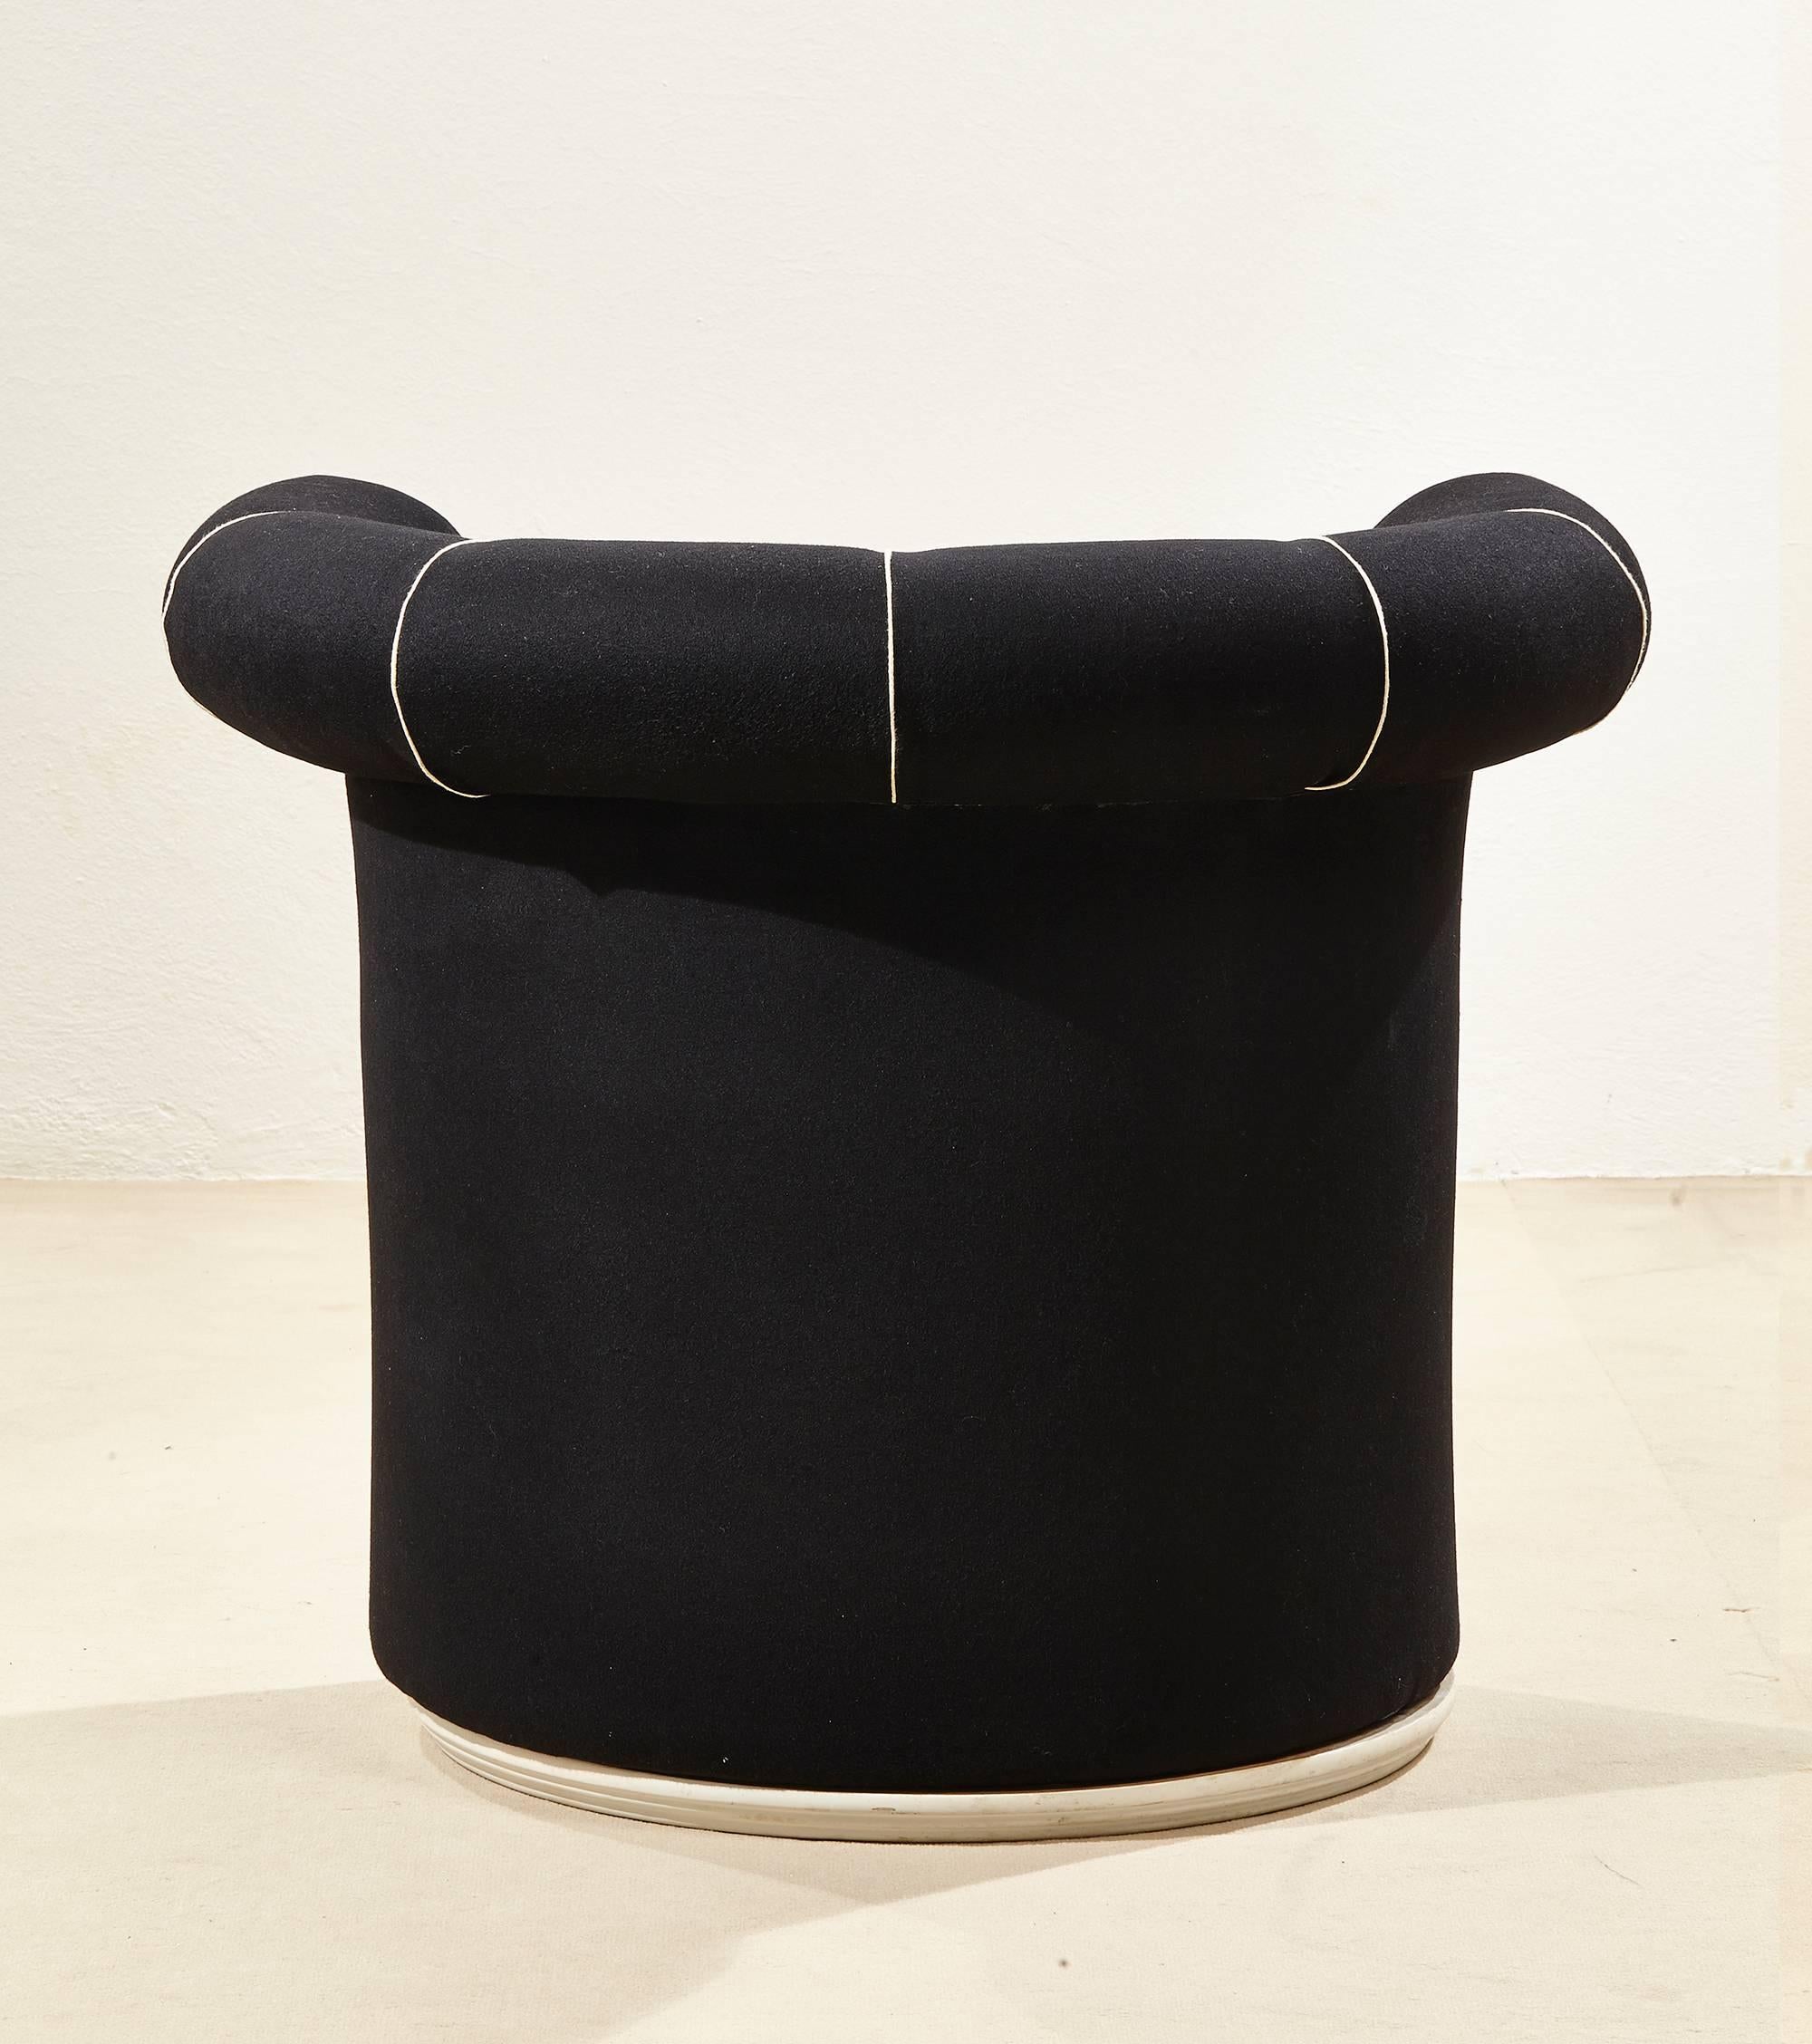 A rare early version of the famous Liuto armchair designed by Paolo Portoghesi for Poltronova. The piece dates from circa 1970 and is upholstered in black fabric instead of the more commonly seen leather.